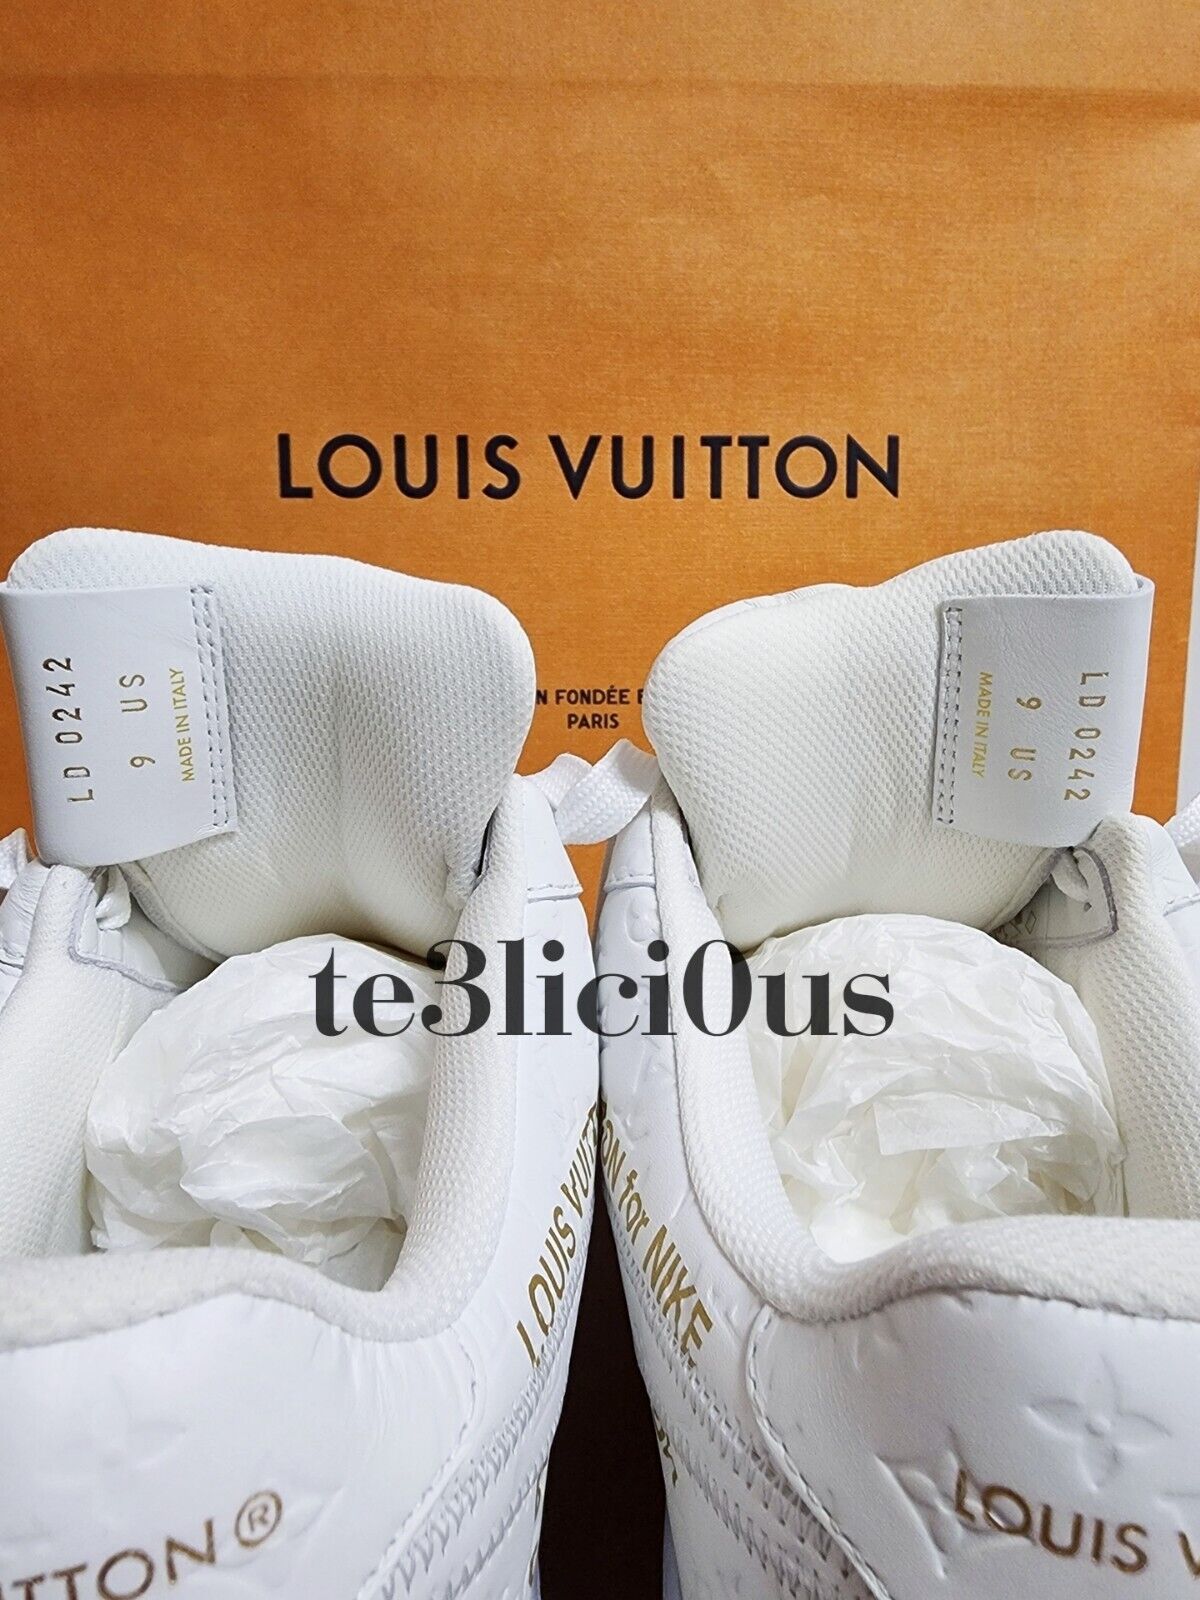 Louis Vuitton/Air Force White Leather Low Top Sneakers Size 43 Louis Vuitton